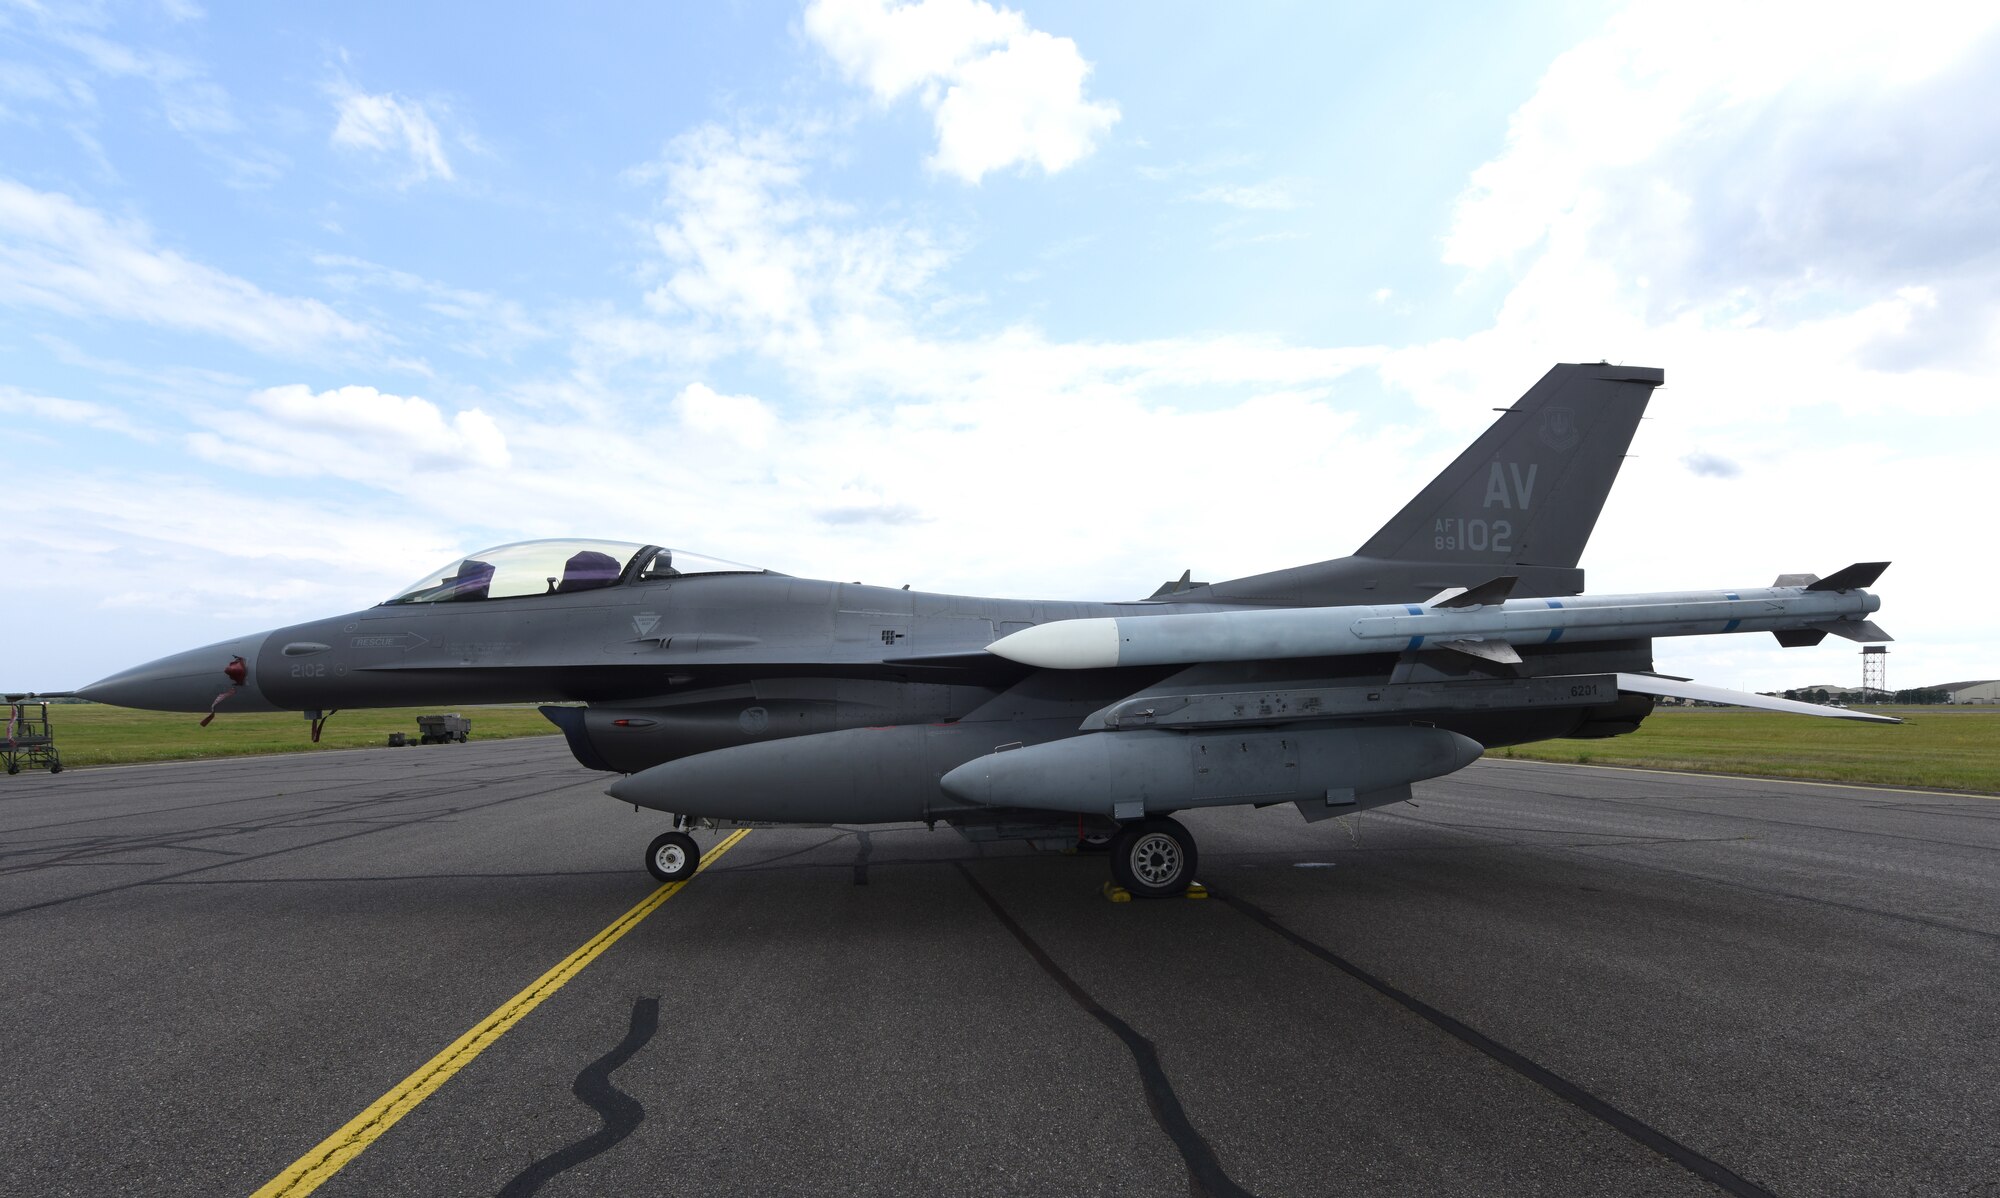 A U.S. Air Force F-16 Fighting Falcon aircraft assigned to the 31st Fighter Wing, Aviano Air Base, Italy, sits on the flightline at Royal Air Force Mildenhall, England, Aug. 3, 2021. The F-16 is a compact, multi-role aircraft which is maneuverable and has proven itself in air-to-air combat and air-to-surface attack. (U.S. Air Force photo by Karen Abeyasekere)